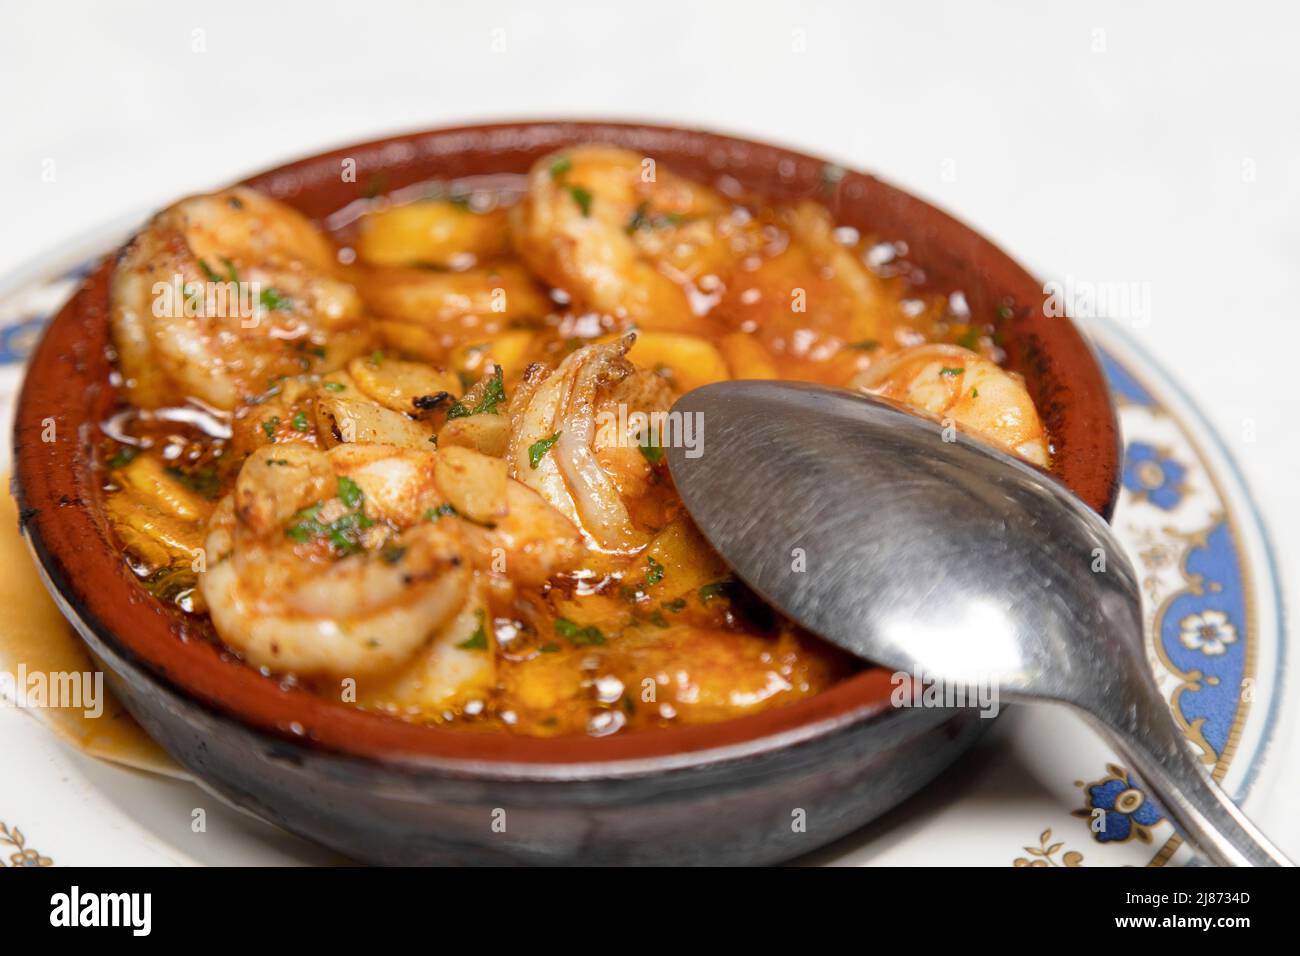 Shrimp cooked in olive oil with garlic (gambas al ajillo) served as an appetiser at a restaurant in Tenerife, Spain. The dish is a popular and traditi Stock Photo